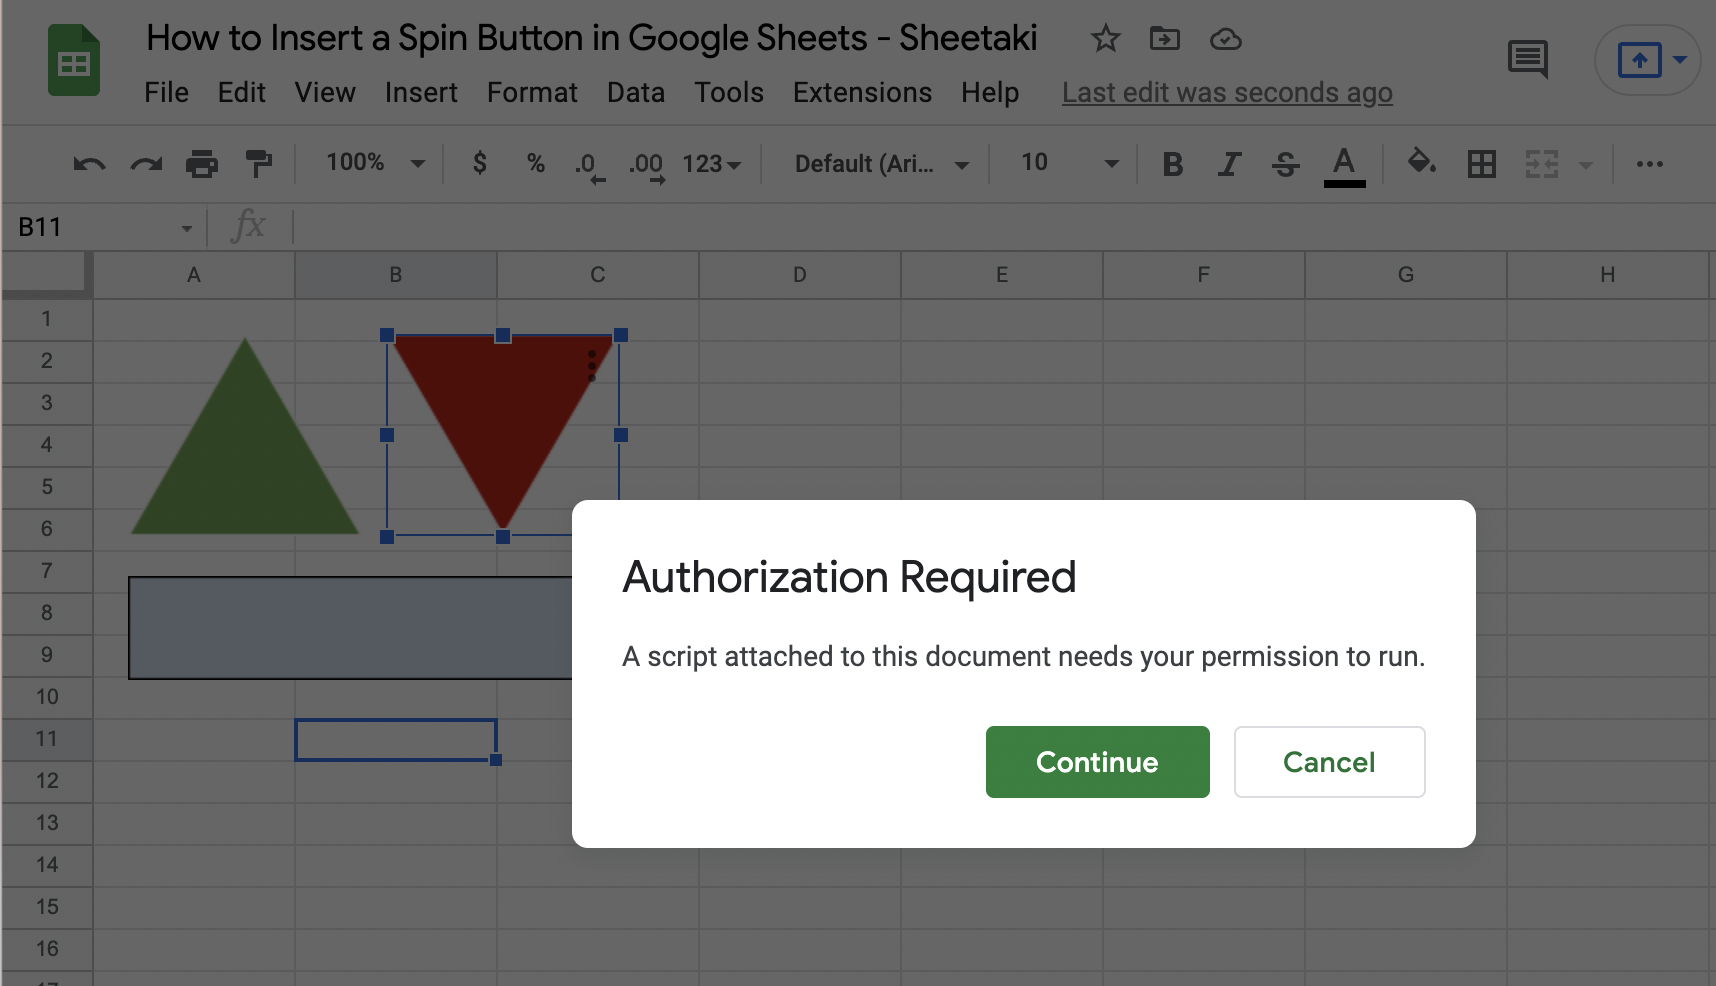 Spin Button in Google Sheets